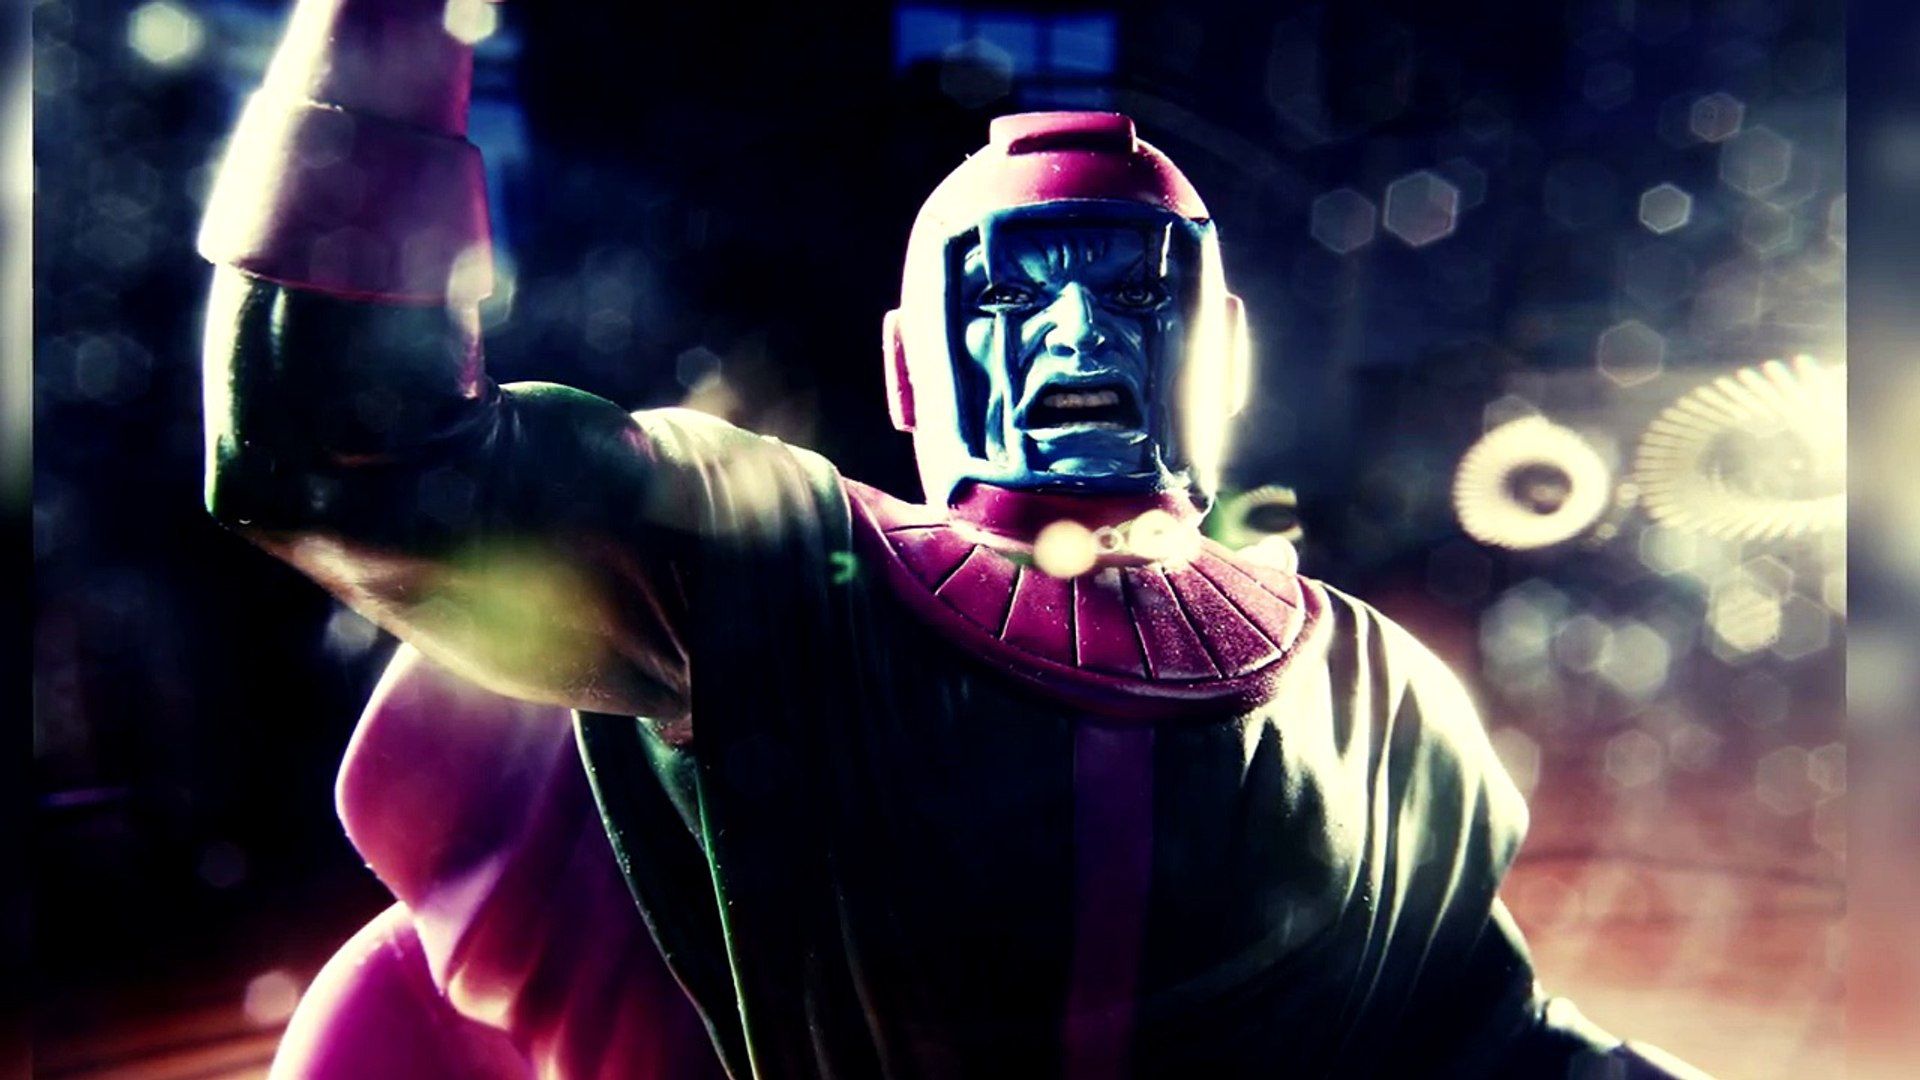 Confirmed: Kang The Conqueror Owned By 20th Century Fox